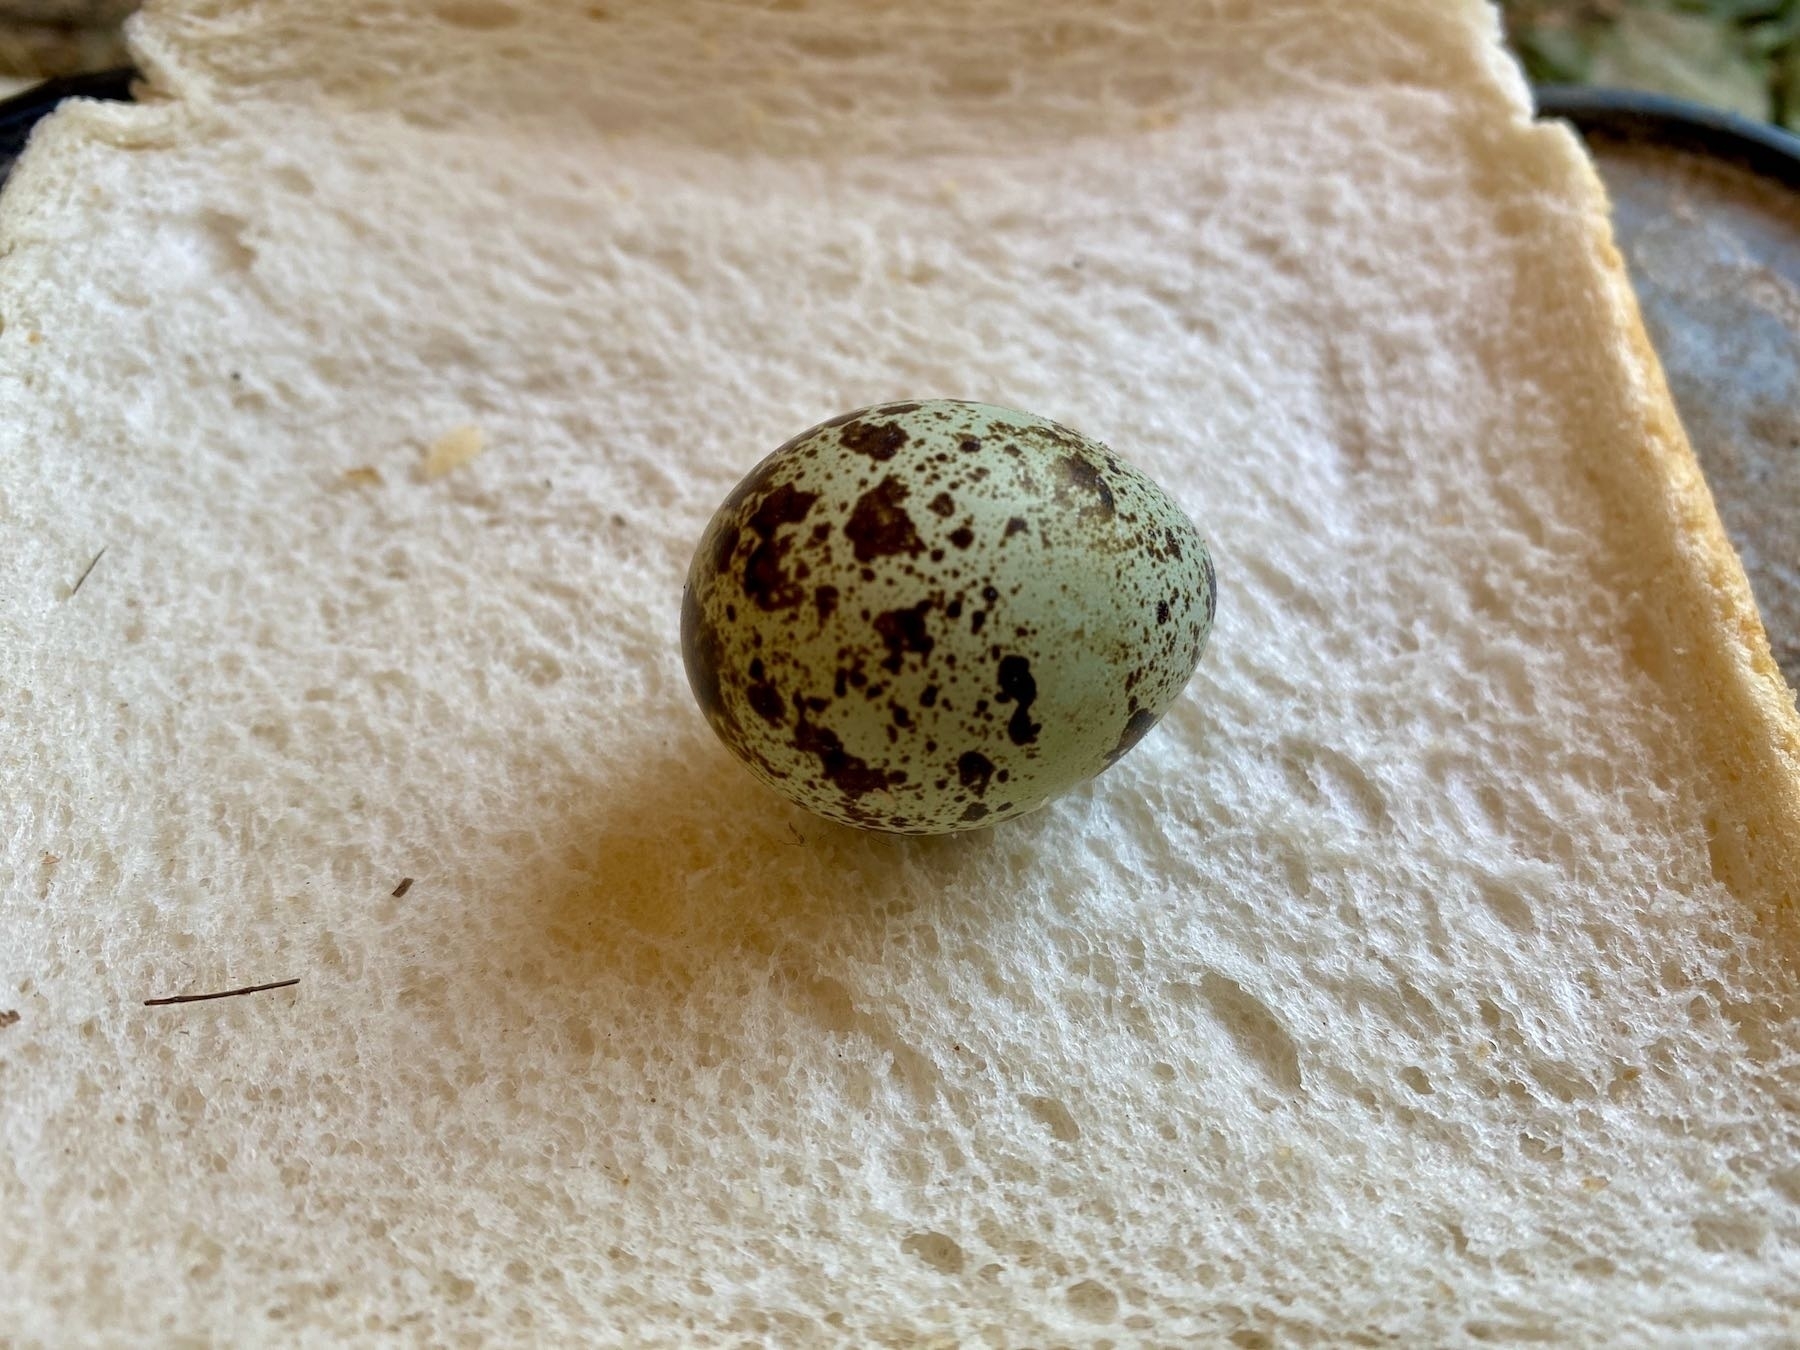 Single quail egg in its shell resting on a slice of white bread.  